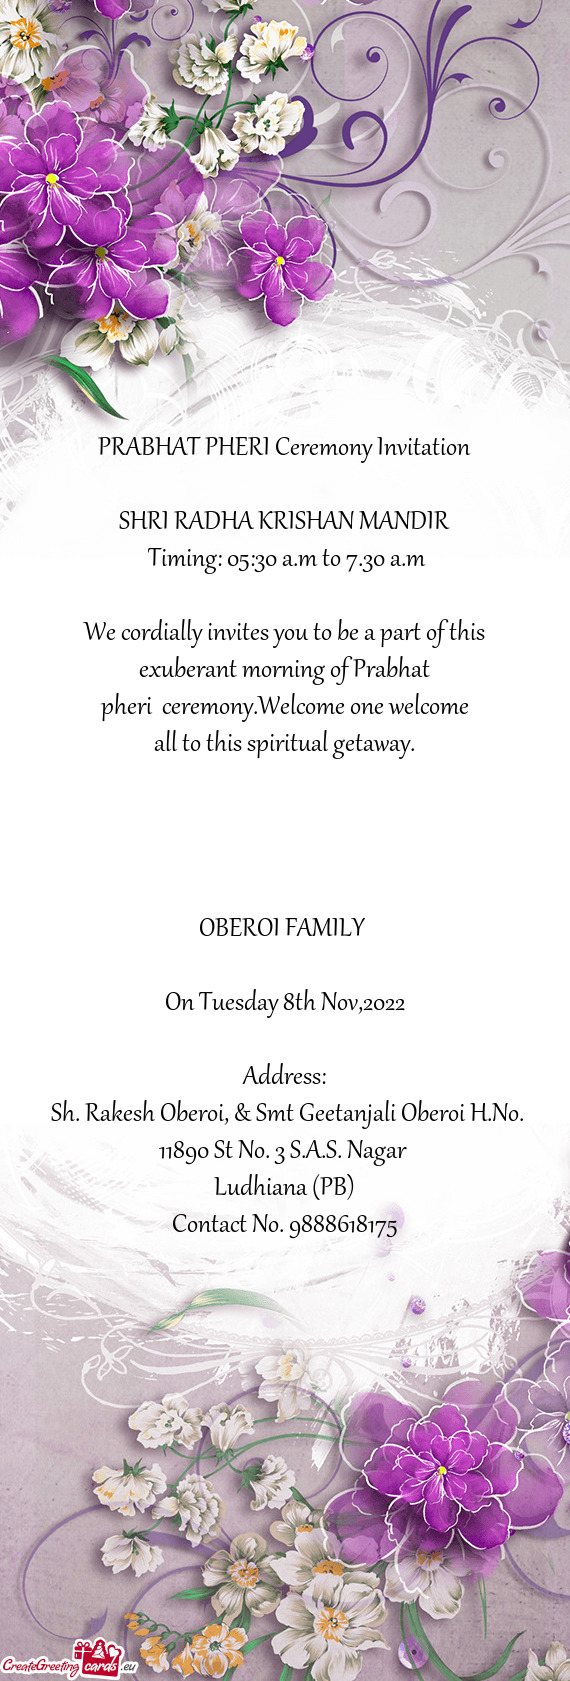 We cordially invites you to be a part of this exuberant morning of Prabhat